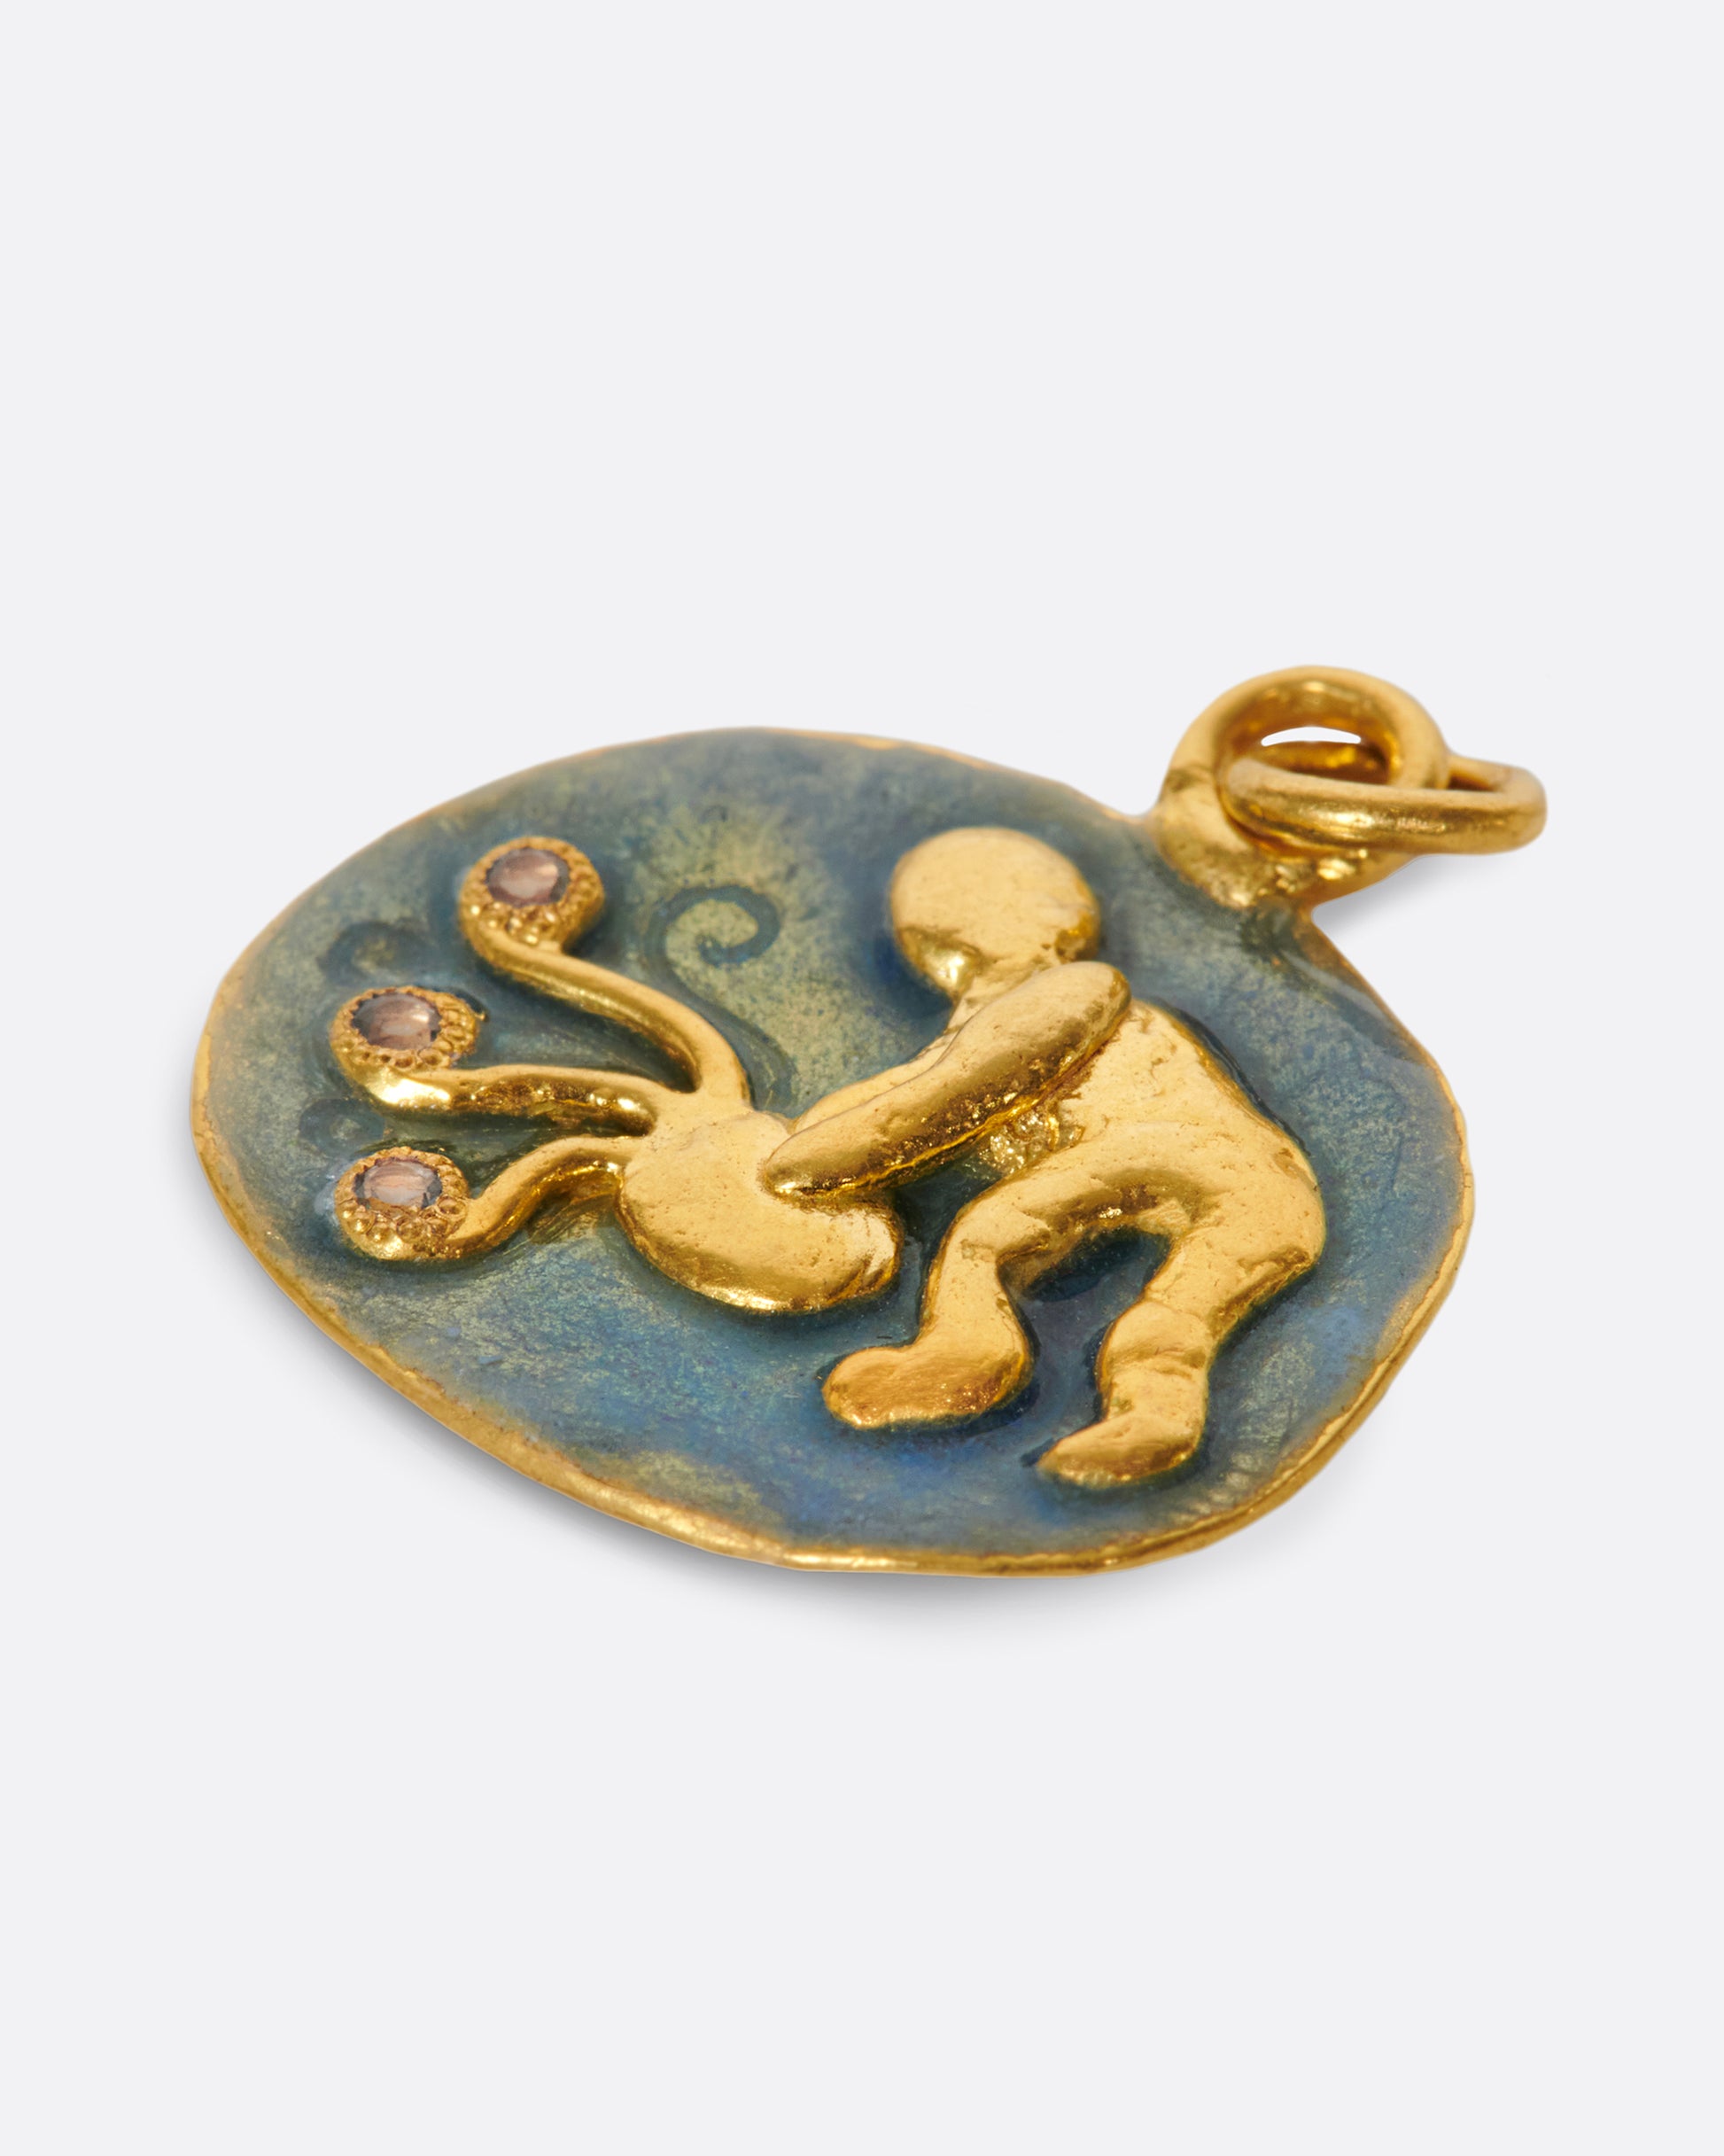 A hand formed medallion pendant with an Aquarius icon, pouring water dotted with aquamarines.